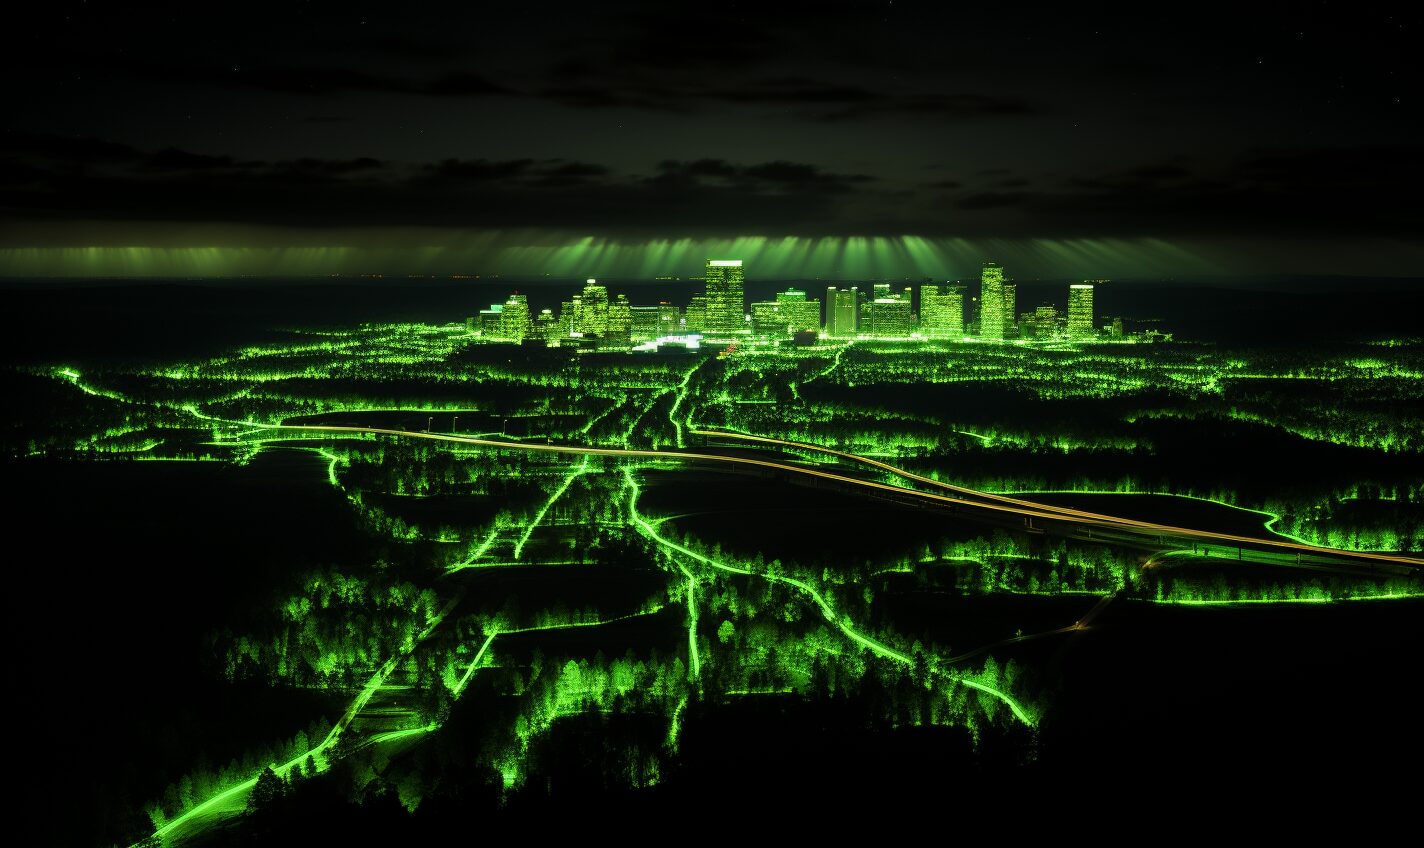 montgomery, alabama in a black and neon green glow